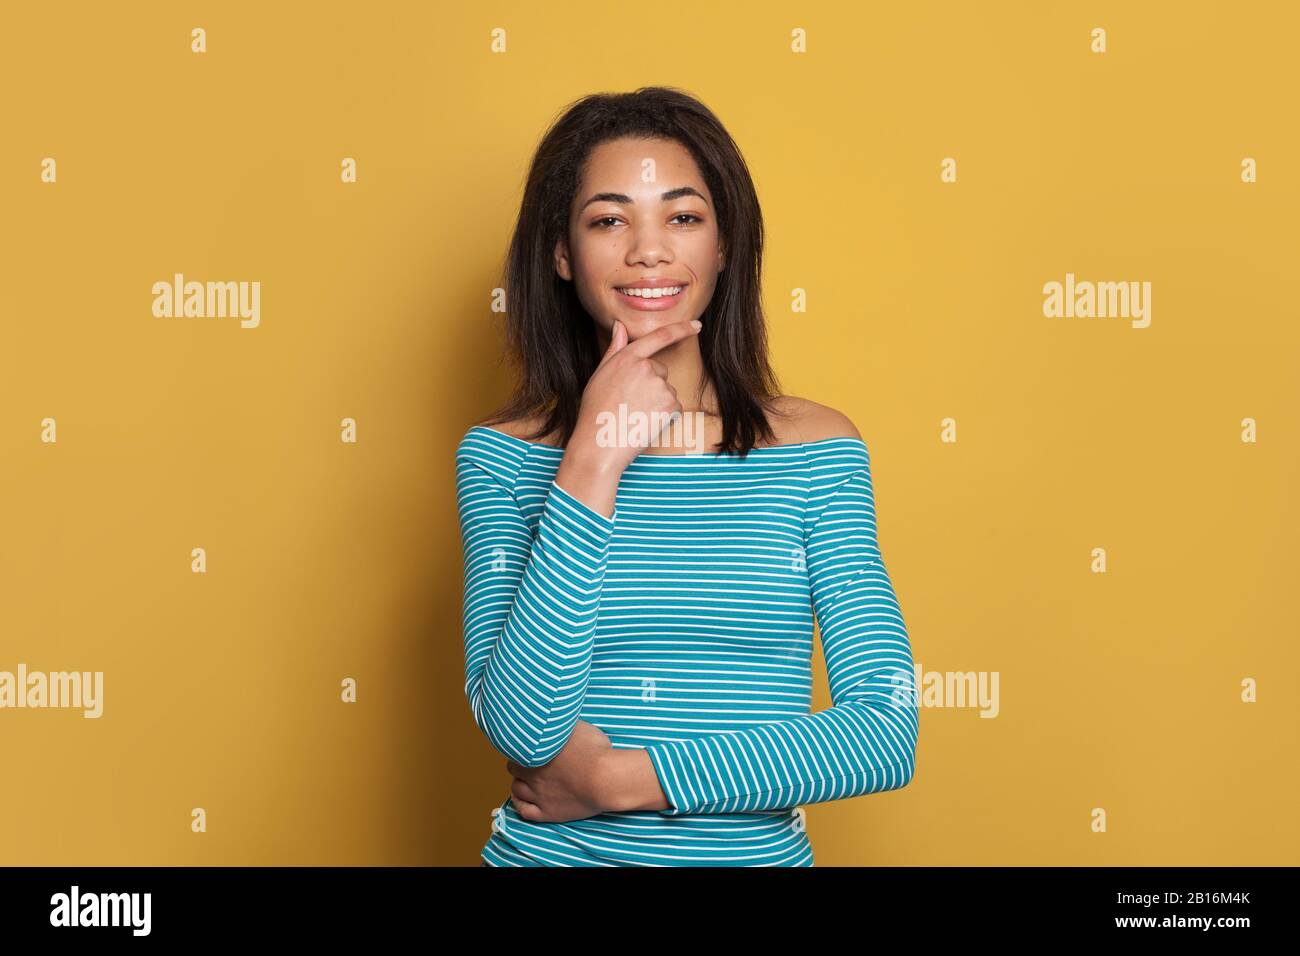 Cute smart mixed race ethnicity black woman in blue shirt thinking on colorful yellow background Stock Photo